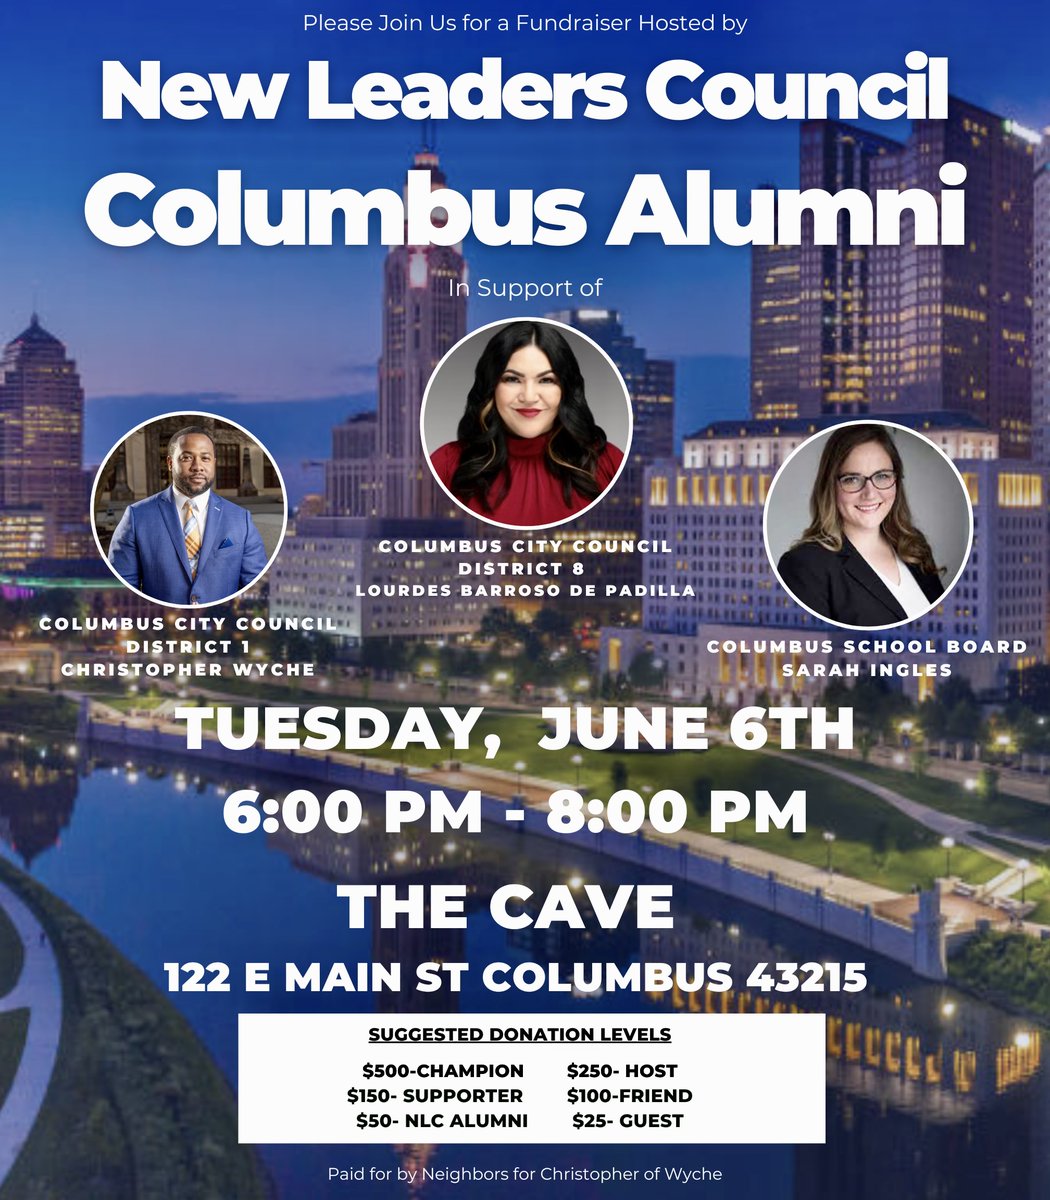 Please Join us for a Fundraiser Hosted by New Leaders Council Columbus Alumni at The Cave (122 E. Main St. 43215) Tuesday, June 6th from 6pm - 8pm. #christopherwycheforcolumbuscitycouncil #columbuscitycouncildistrict1 #crowndistrict